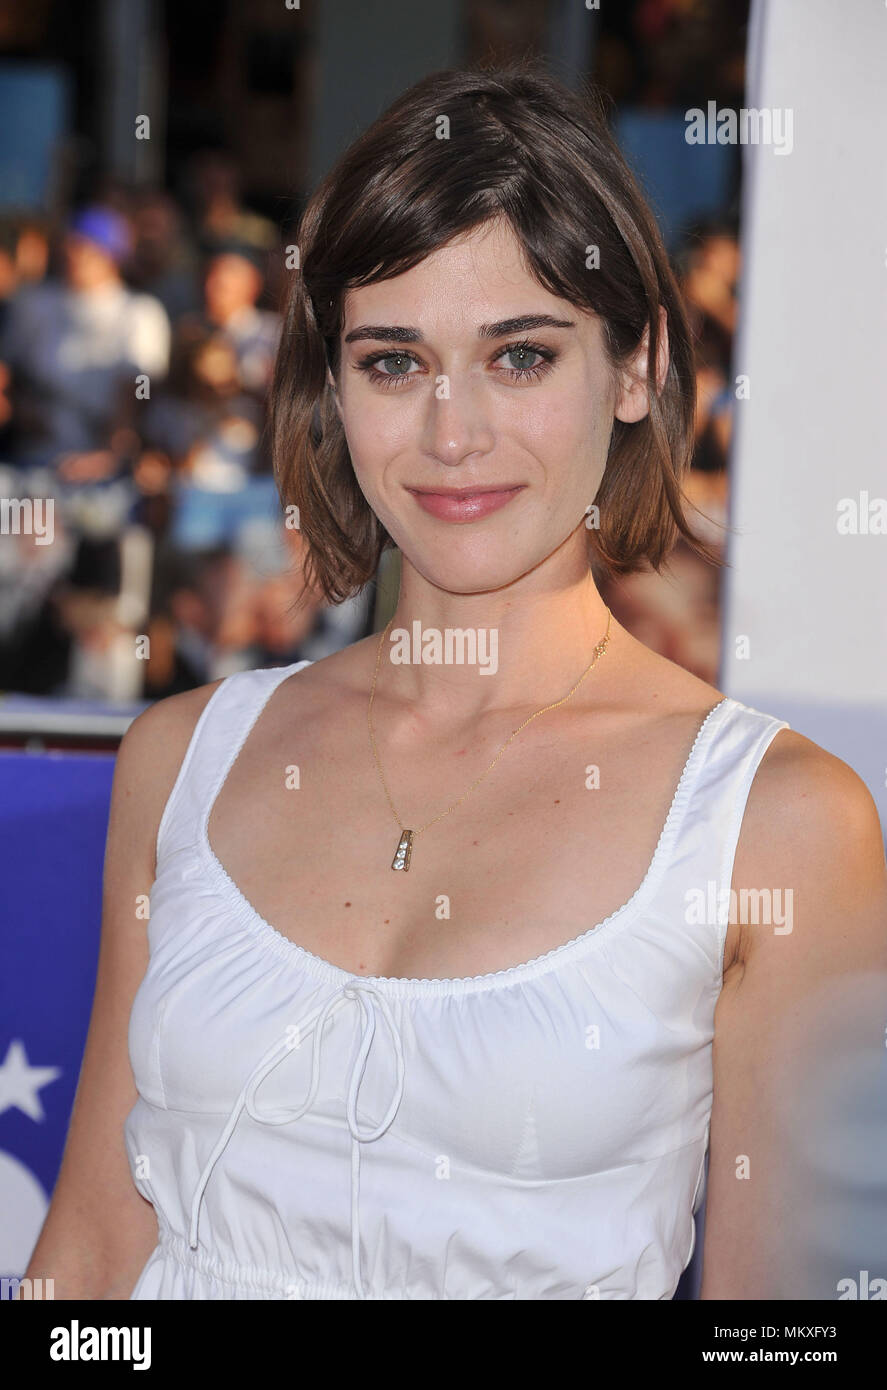 Lizzy picture caplan of 41 Hottest